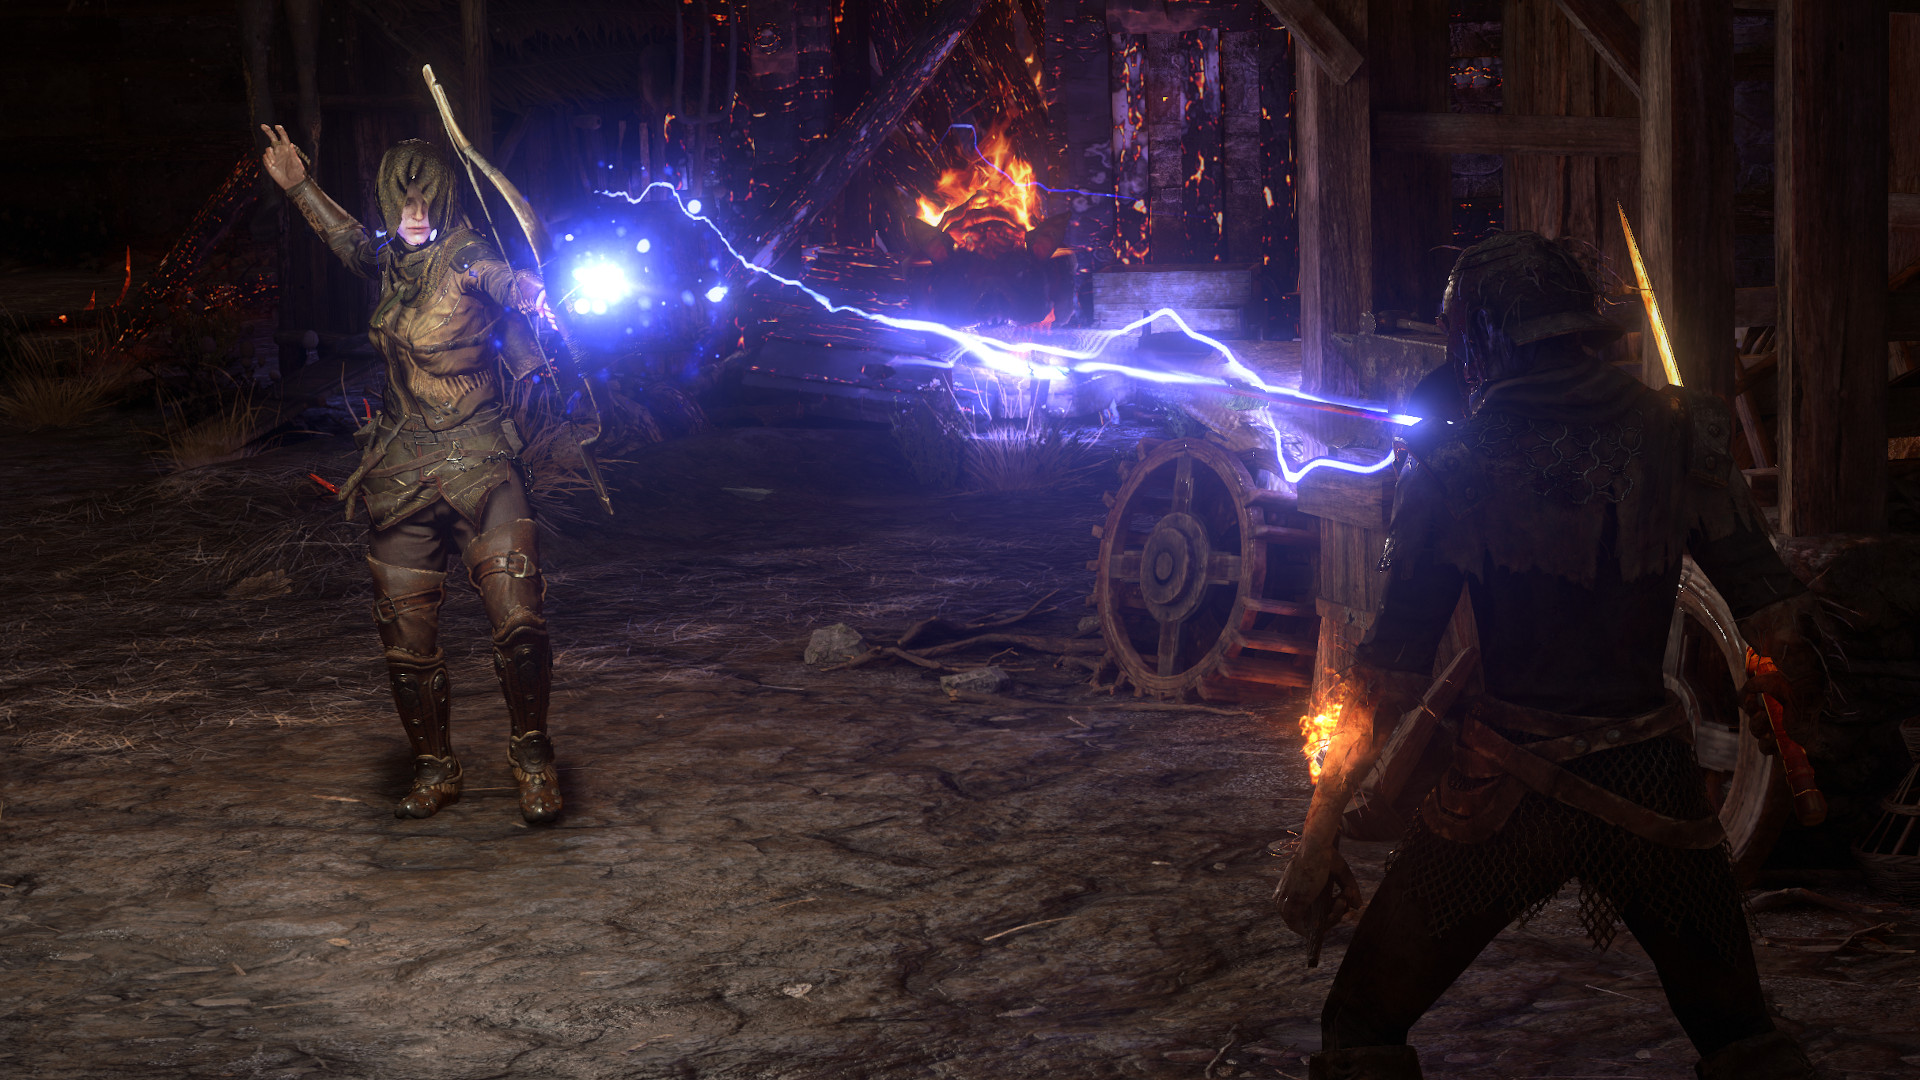  Path of Exile 2 is a bold, blood-soaked sequel unchained from the first game's old school design 